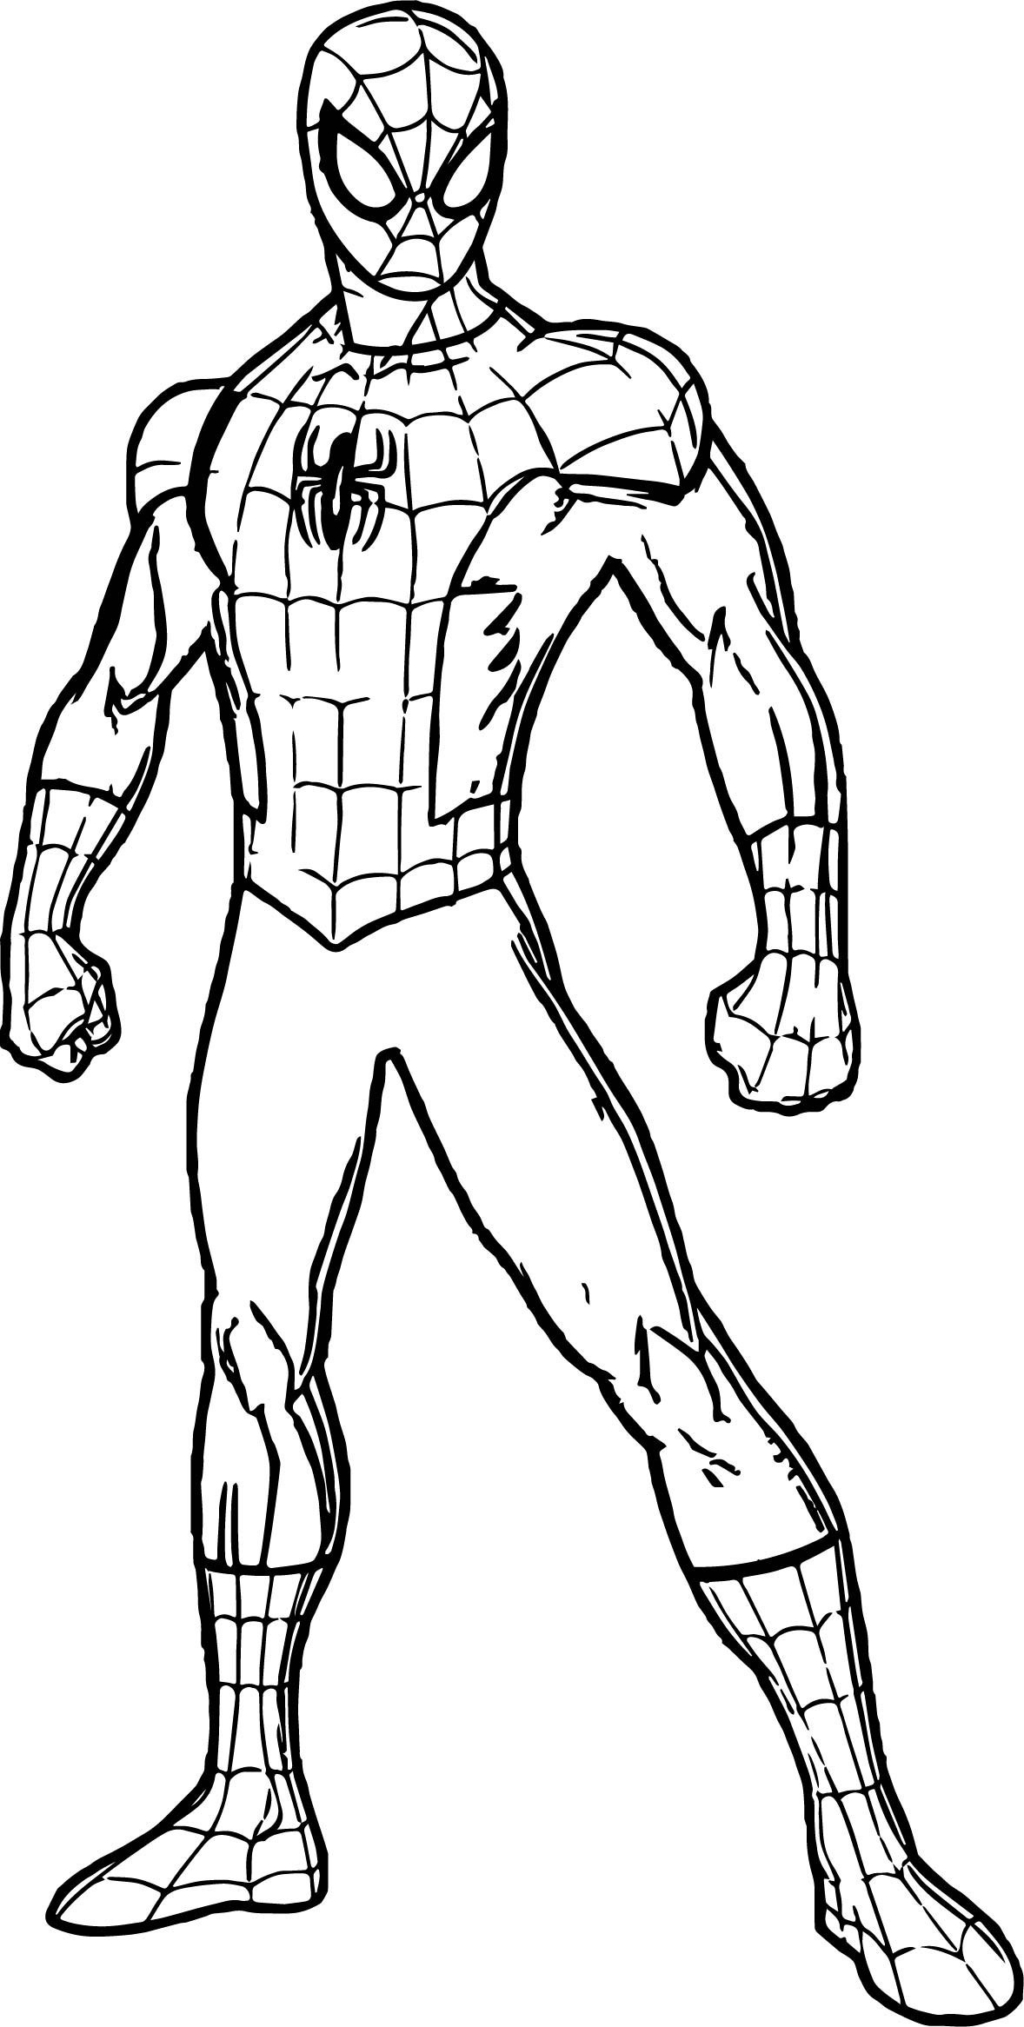 Free Printable Spiderman Coloring Pages Coloring Book World Spiderman Coloring Page New Printable Pages